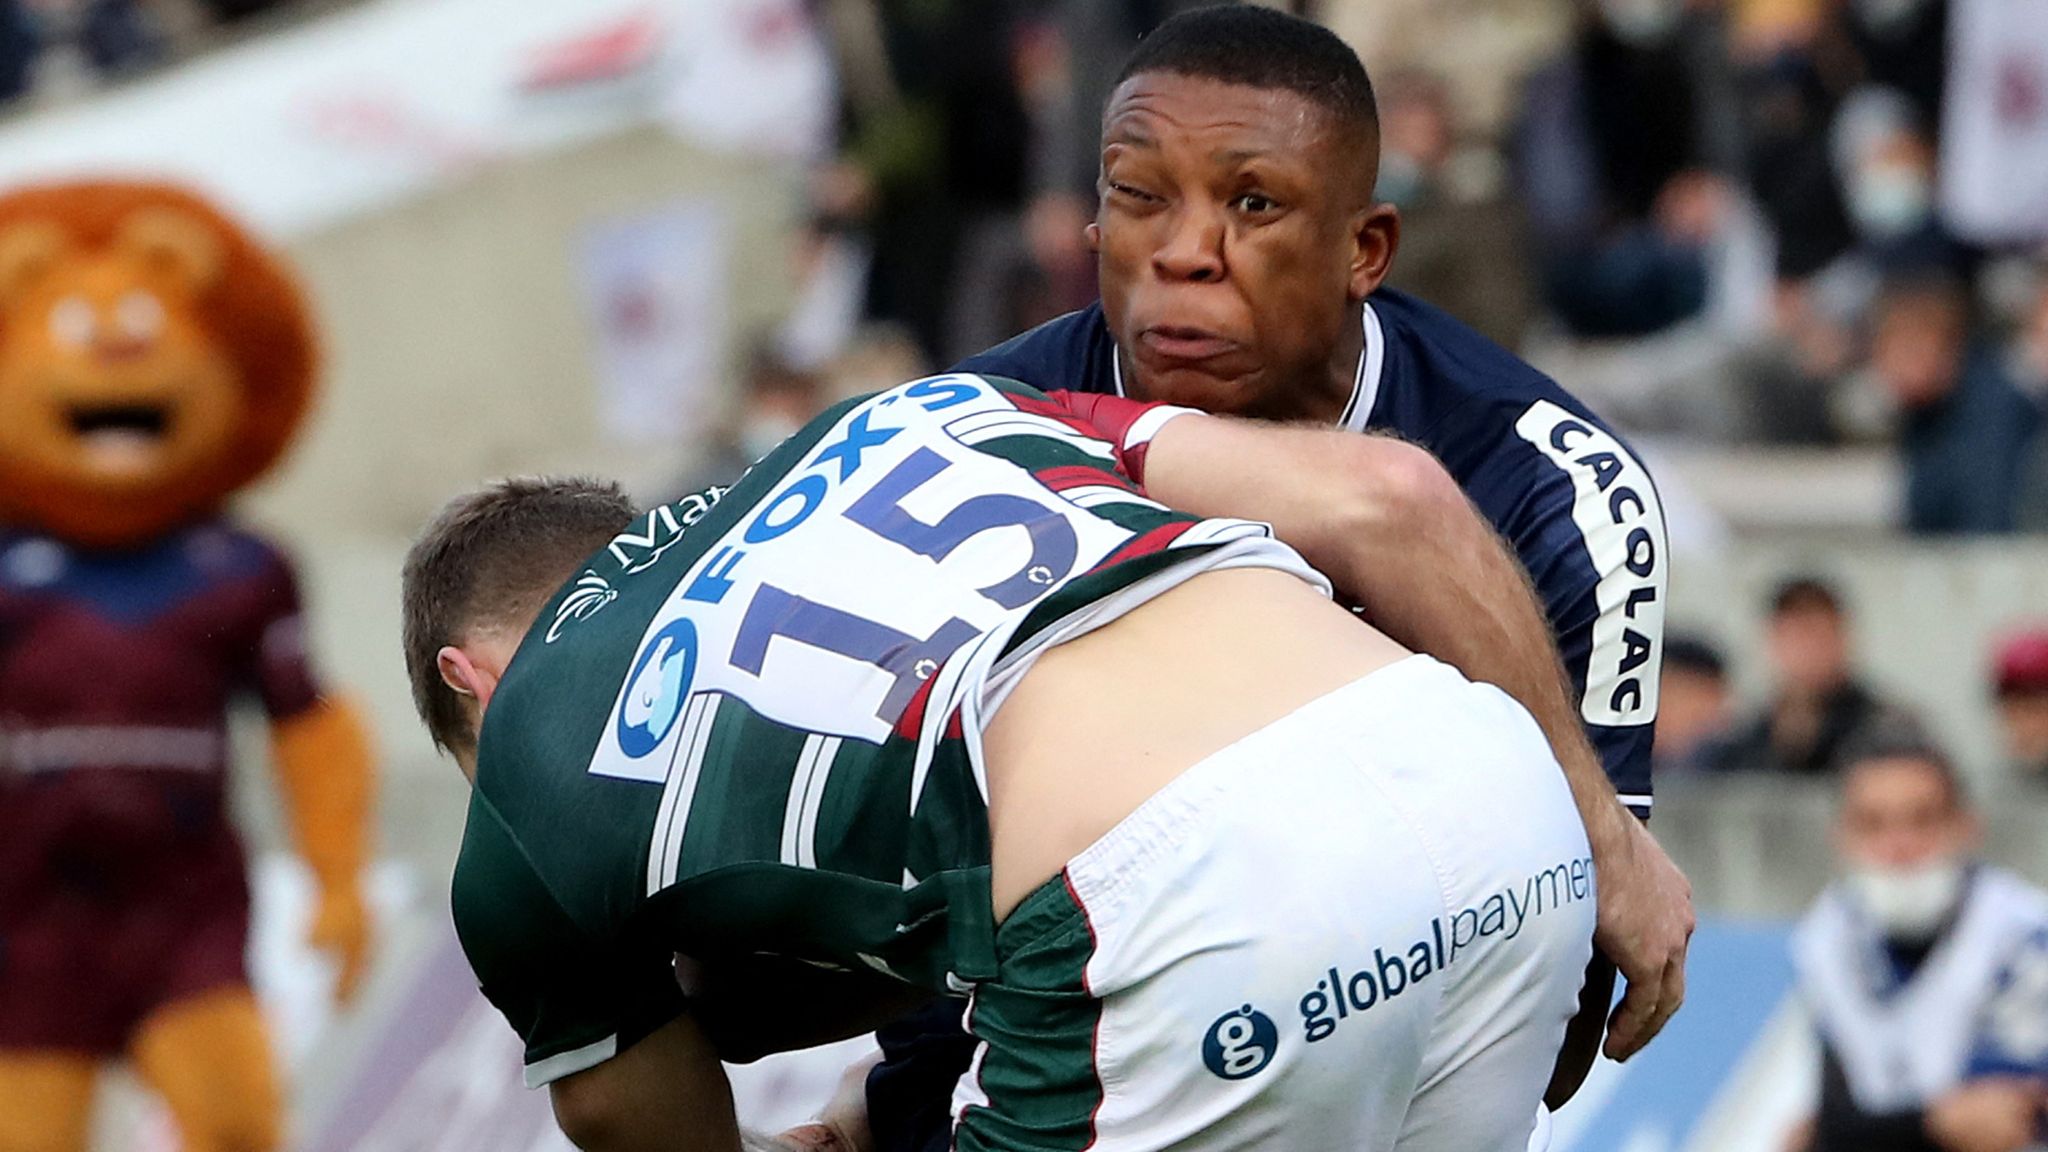 Heineken Champions Cup Bordeaux Begles 13-16 Leicester Tigers recap Rugby Union News Sky Sports